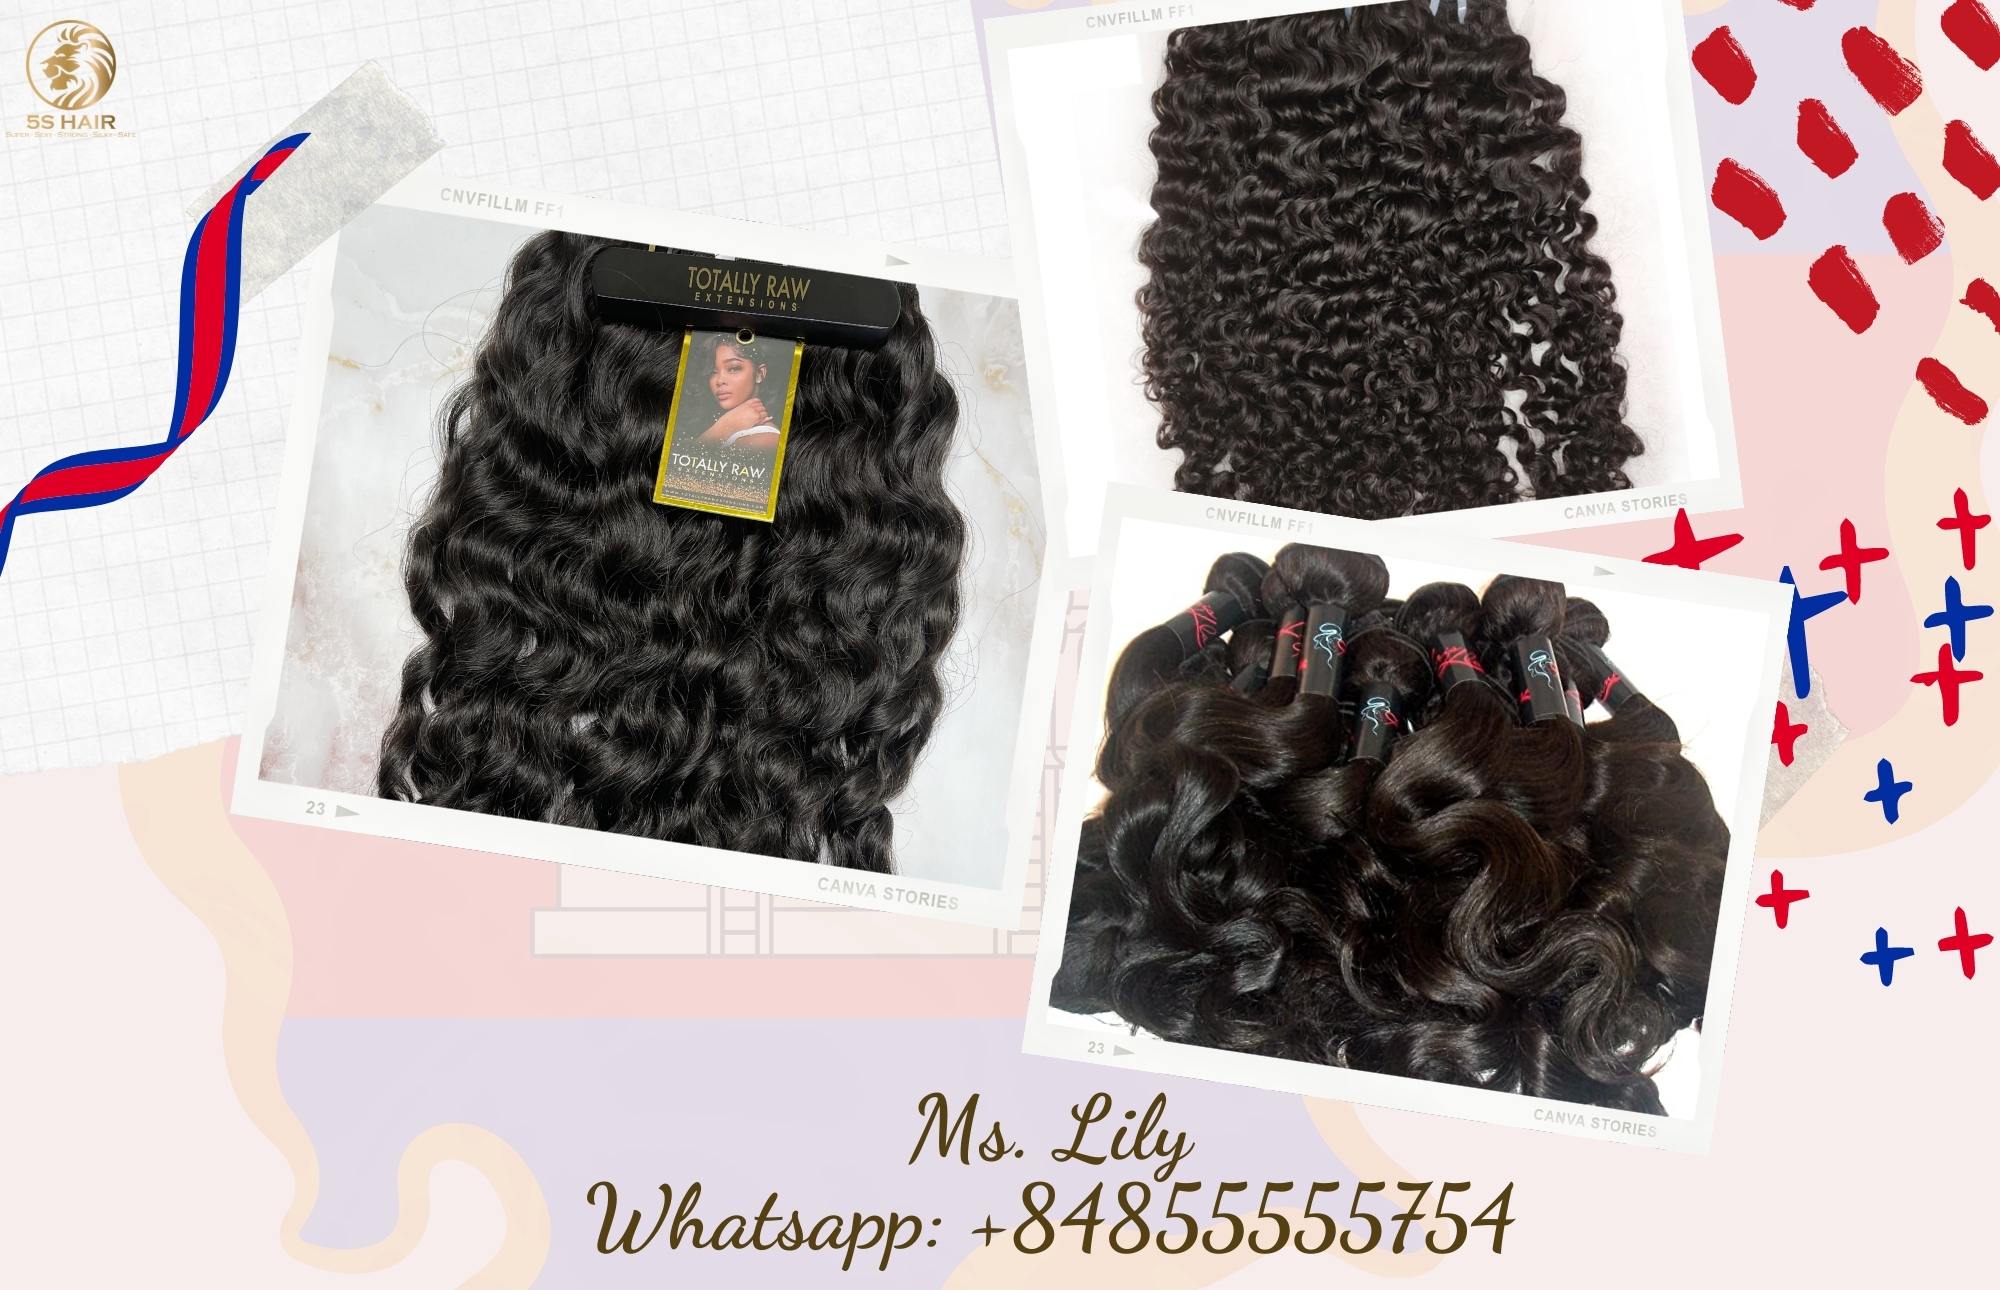 phnom-penh-cambodian-raw-hair-a-good-product-for-hair-extensions-business6